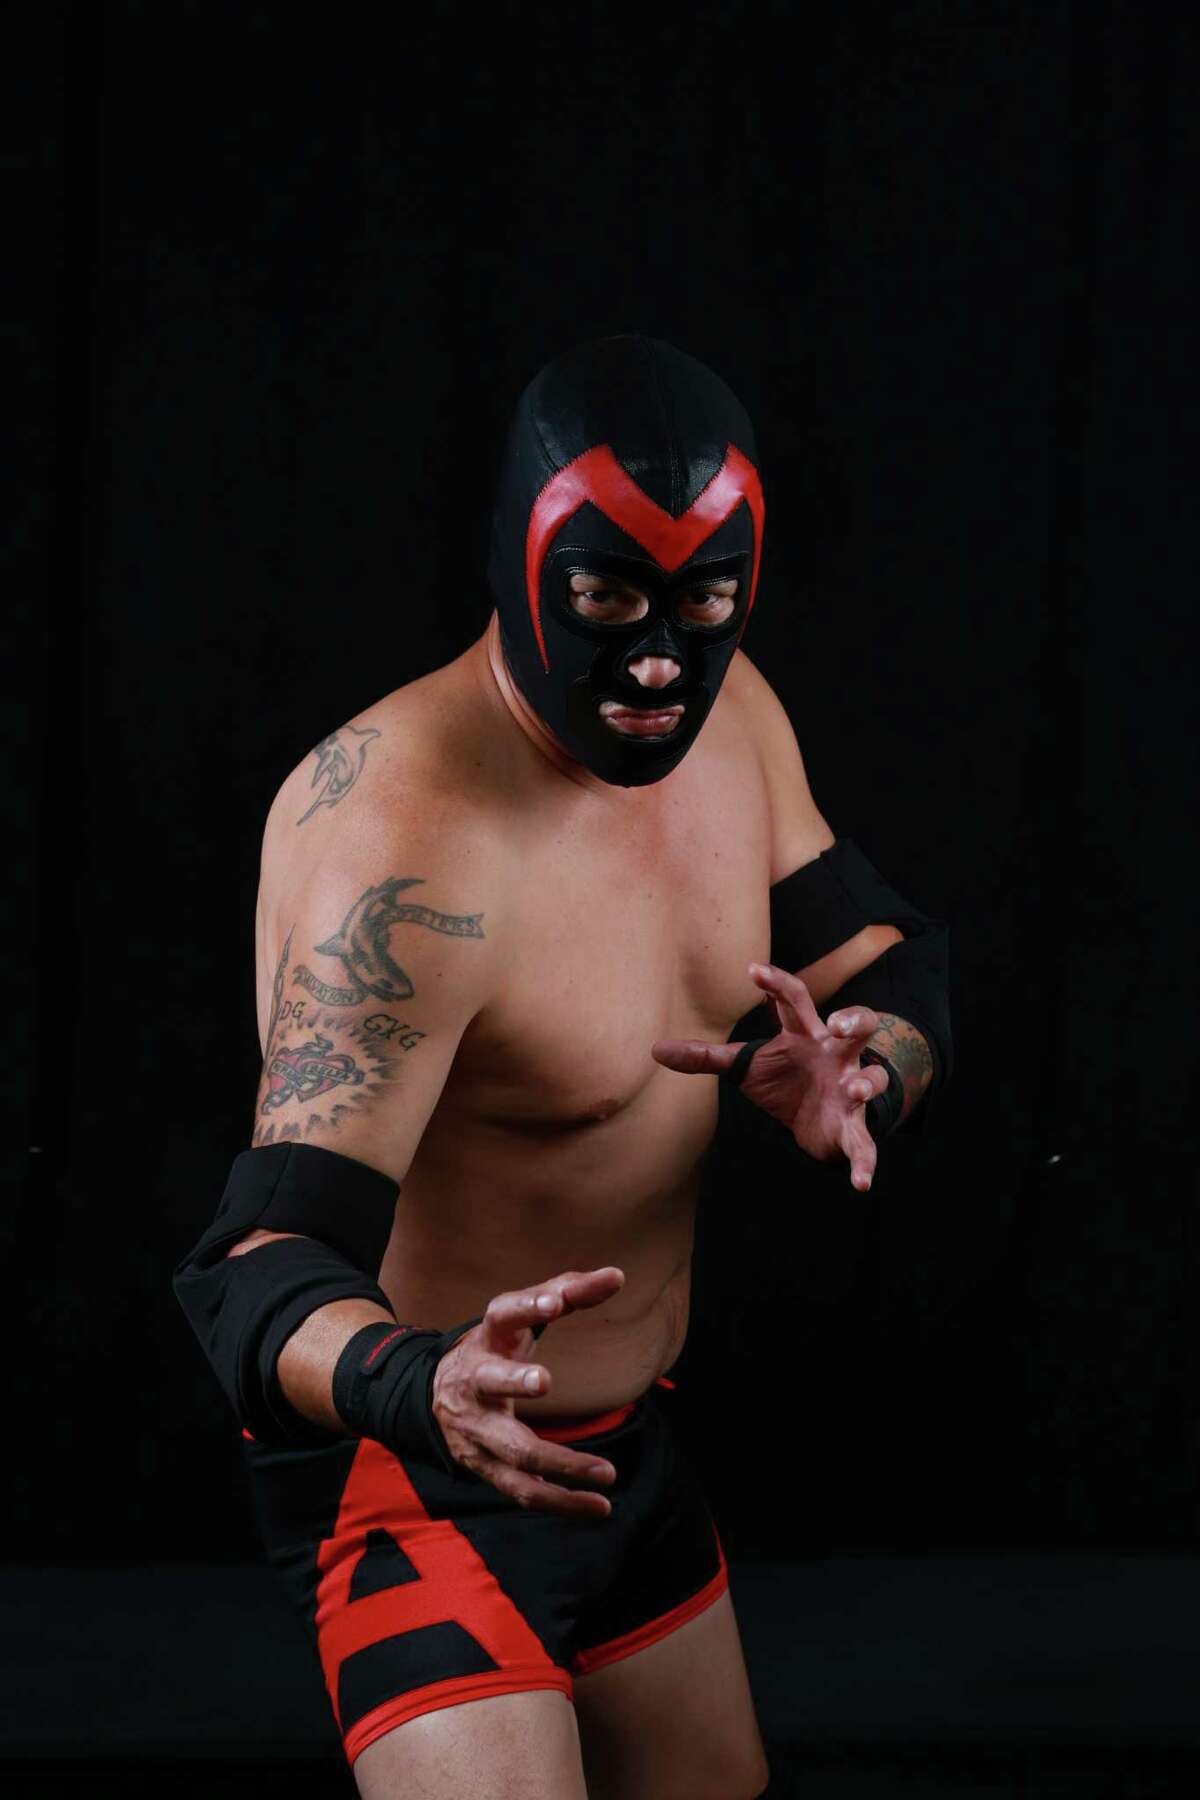 Luis Galindo in "The Elaborate Entrance of Chad Deity" at Stages.